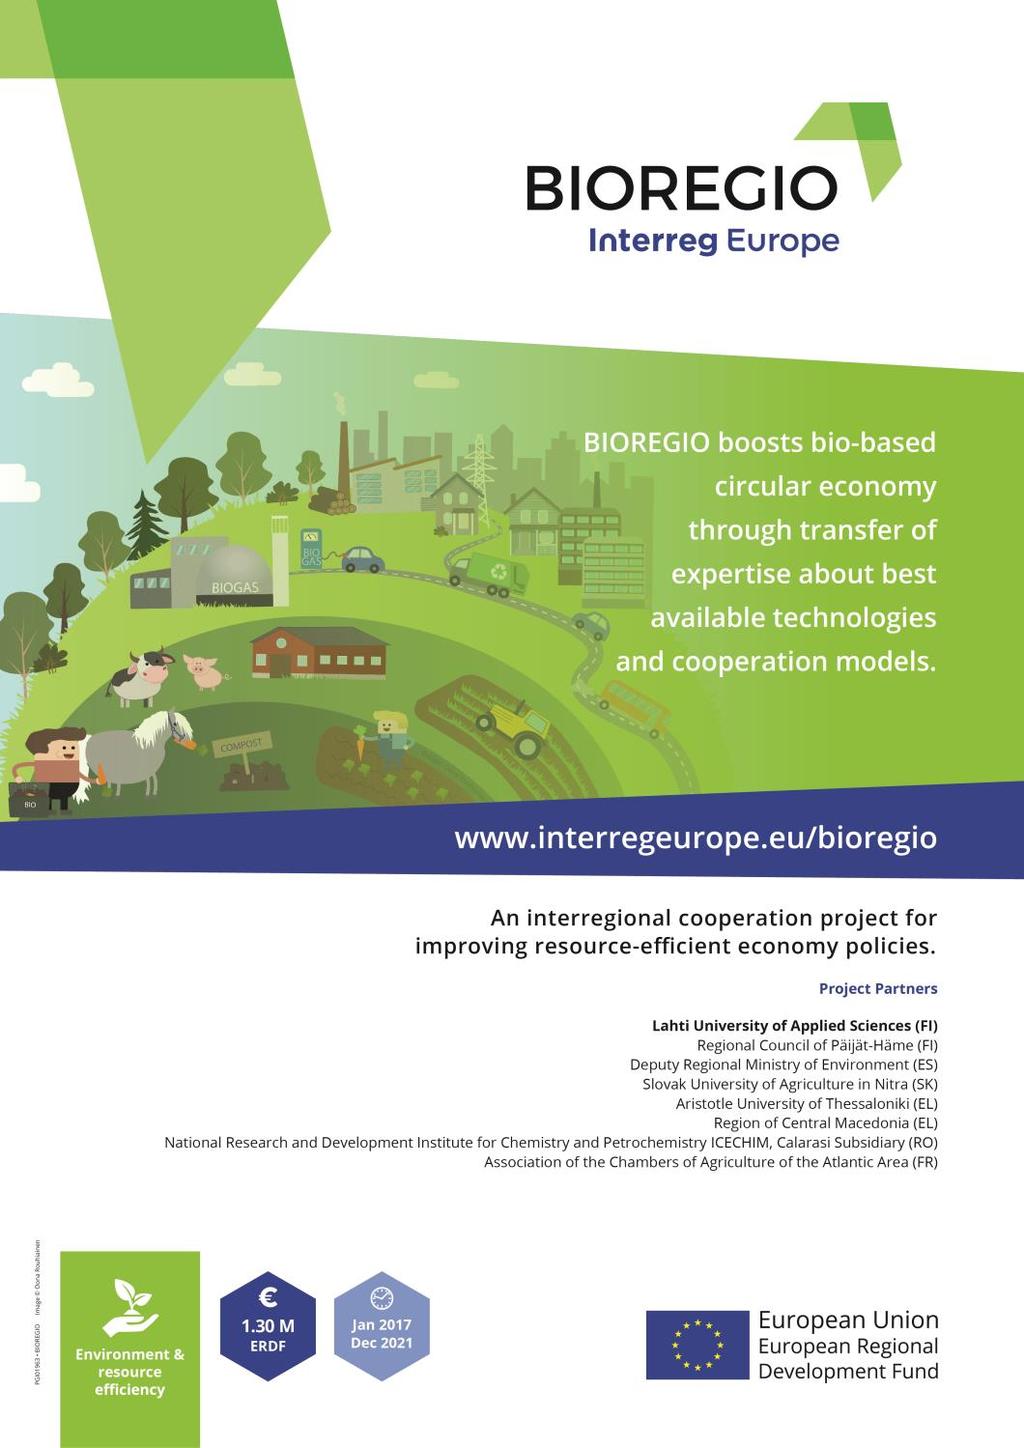 An interregional cooperation project to share expertise about circular economy models and best available technologies of biological streams between other european regions.